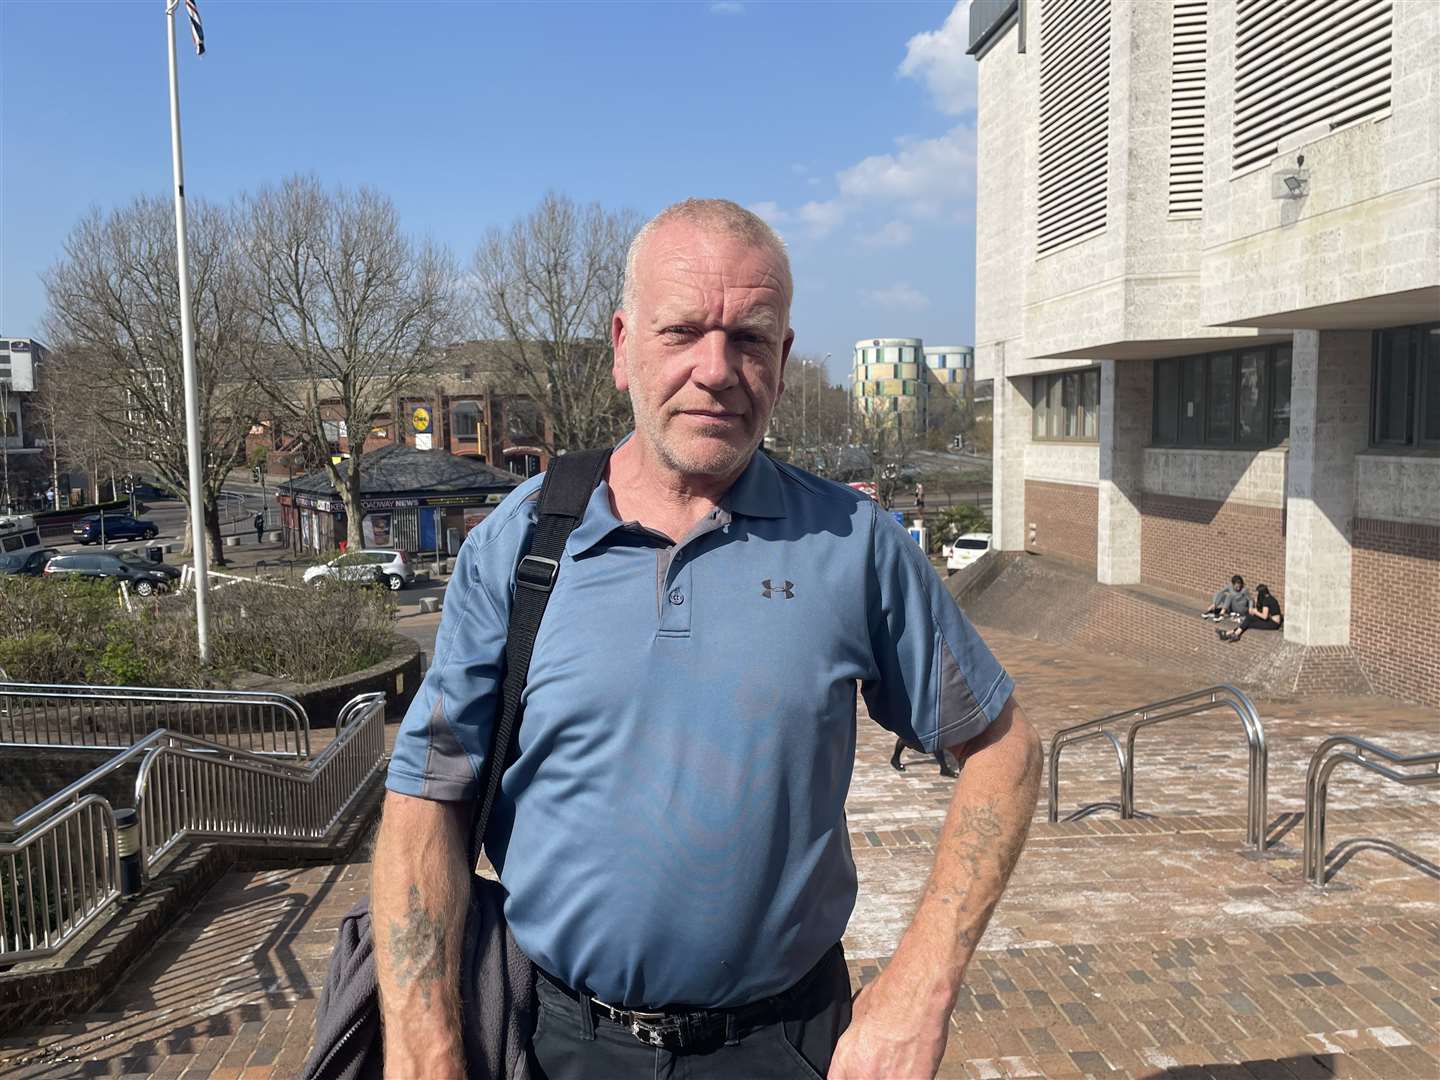 Bob White, 62, from Sheerness, was found not guilty of affray